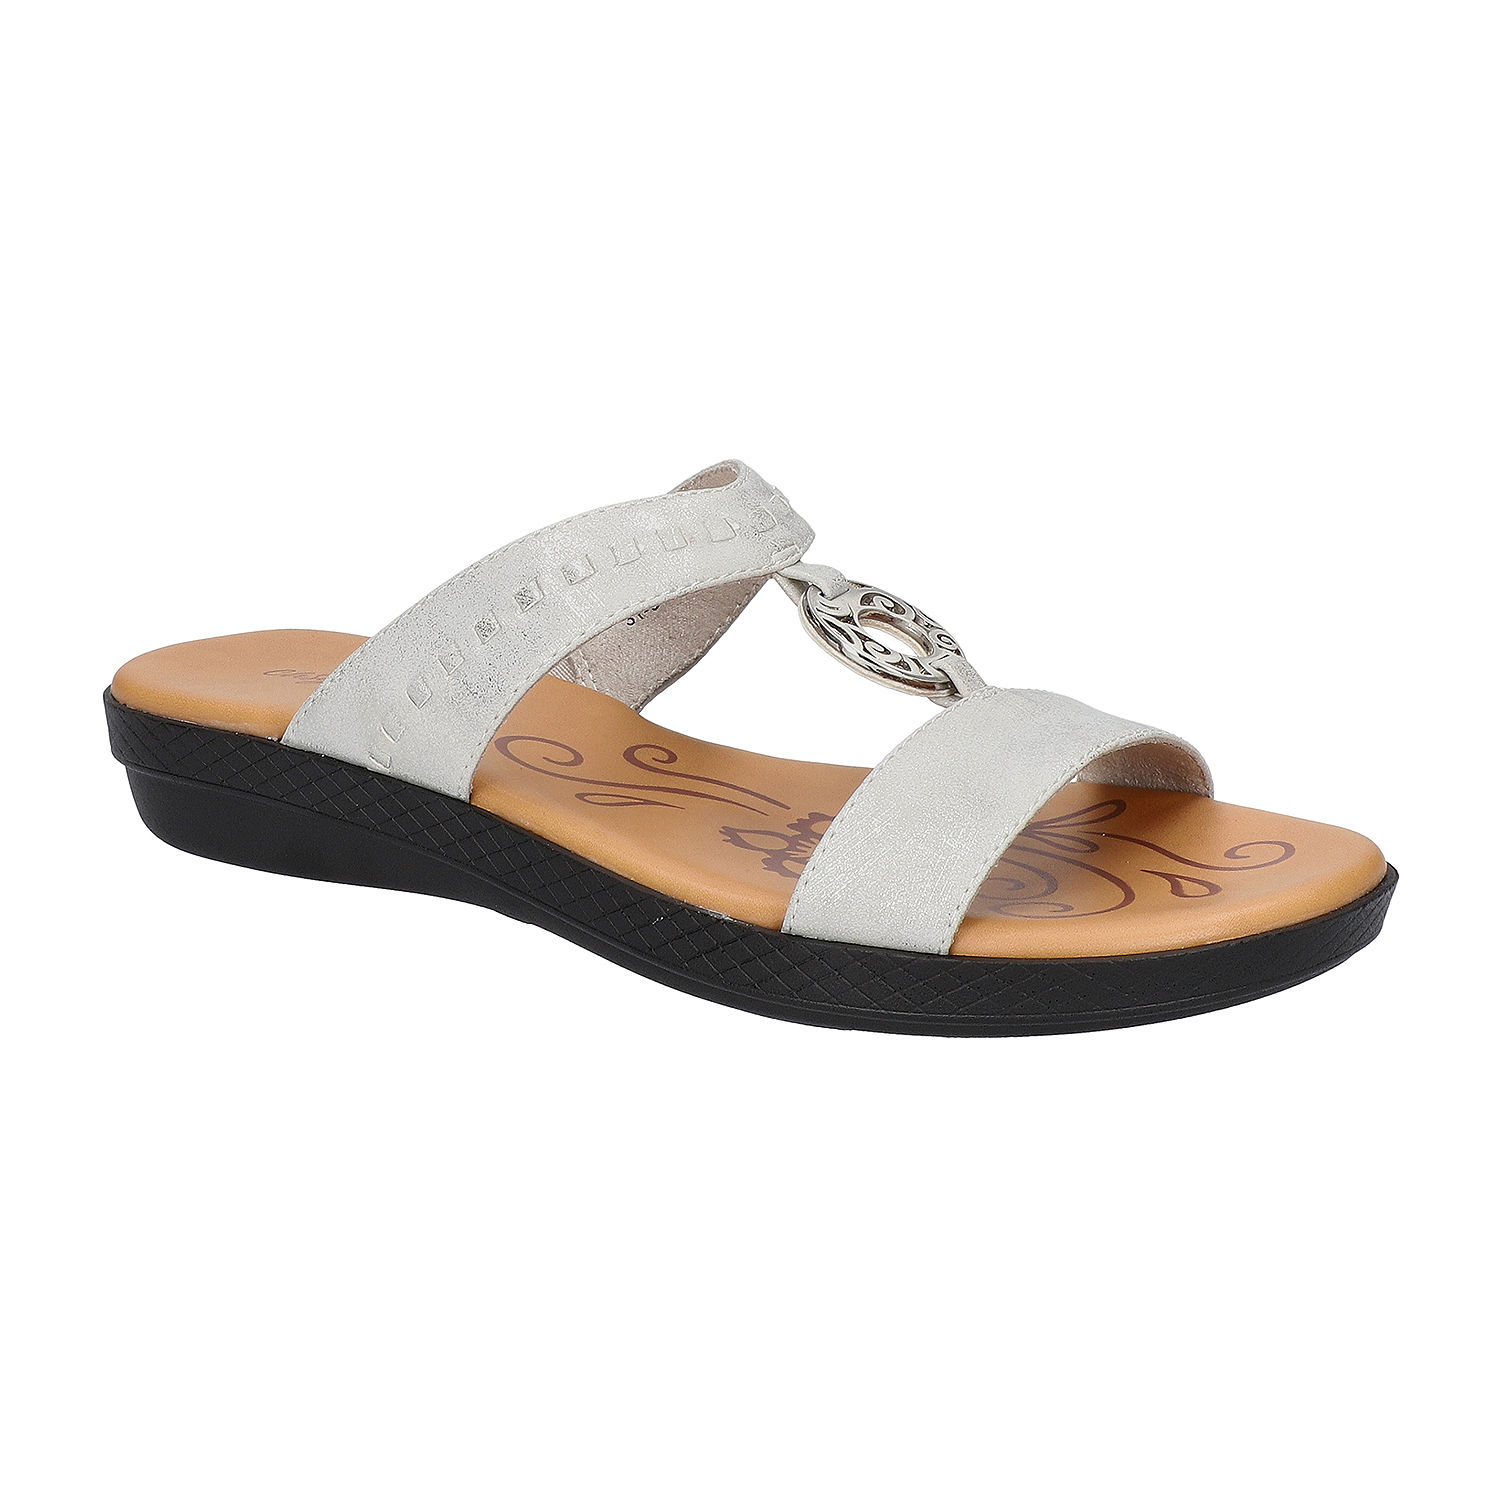 Easy Street Womens Talia Wedge Sandals - JCPenney